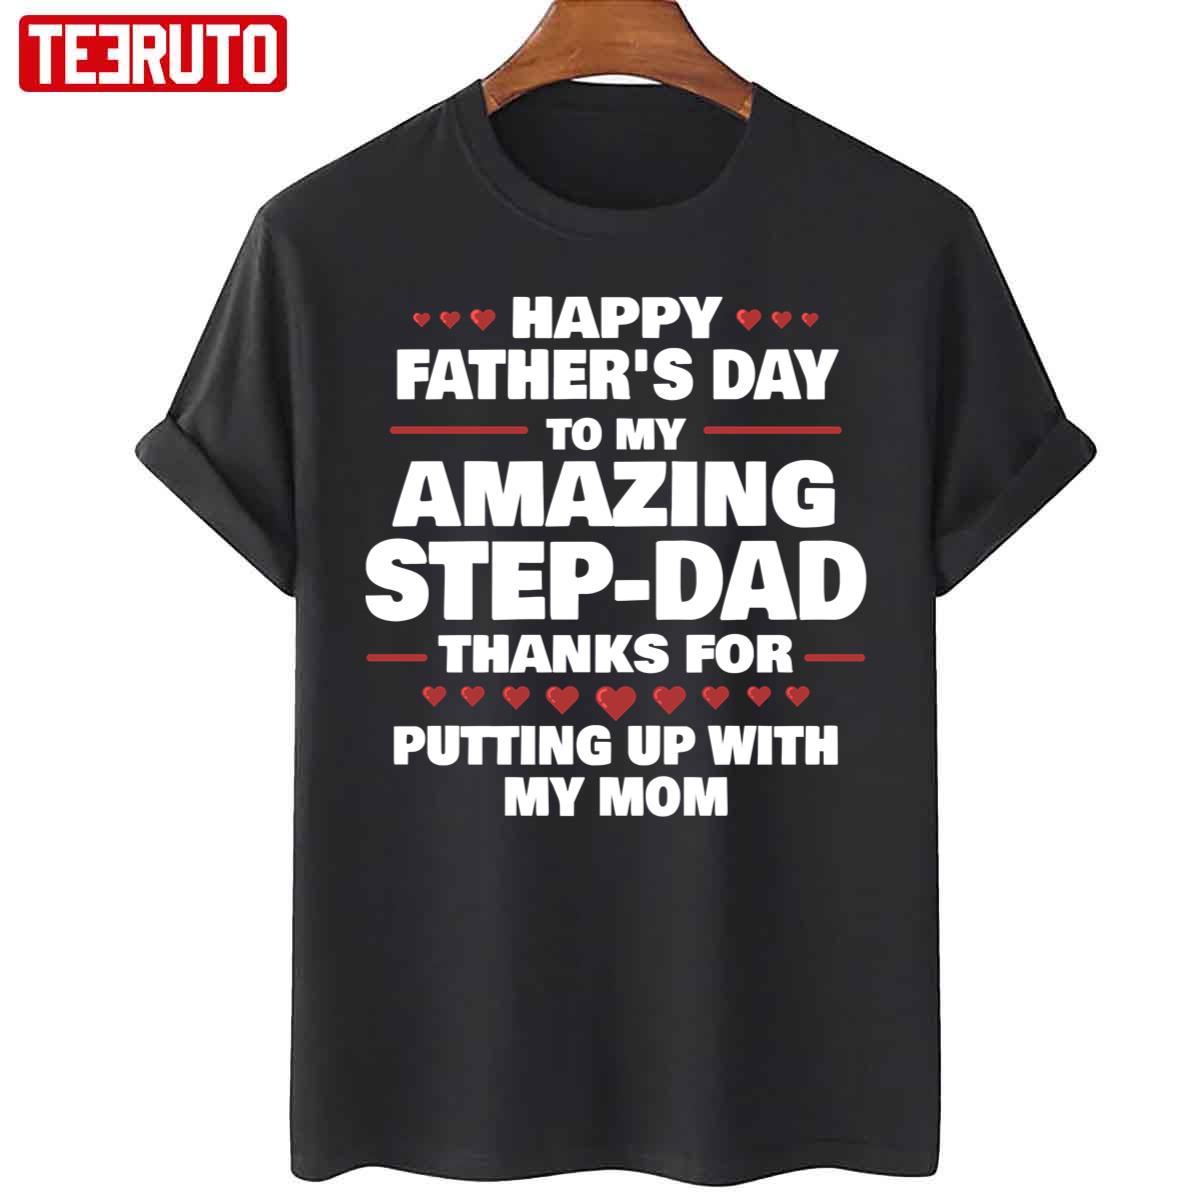 To My Amazing Stepdad Thanks For Putting Up With My Mom T-Shirt